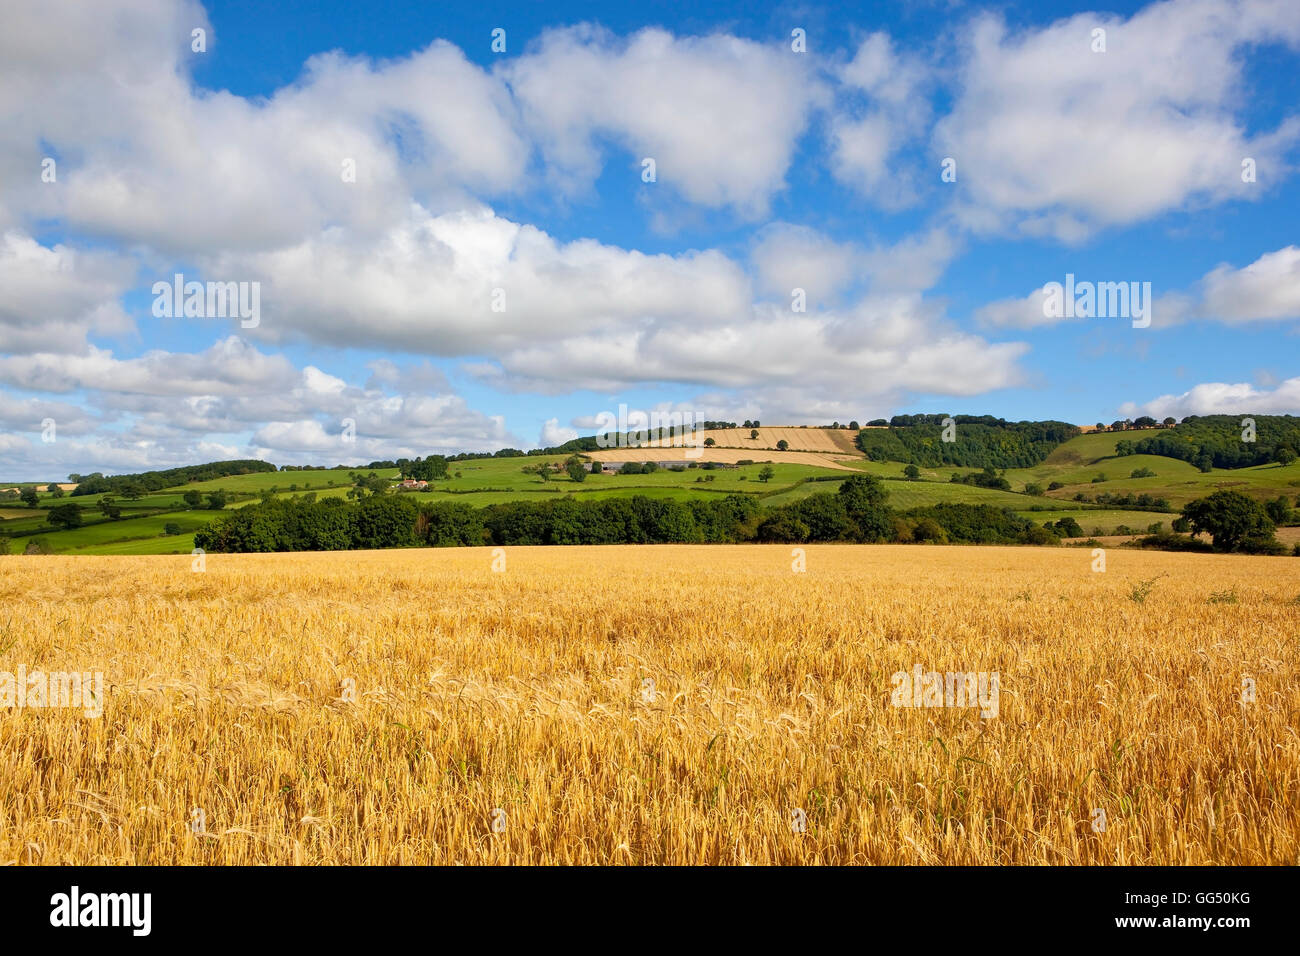 A golden barley field and patchwork landscape of  the Yorkshire wolds in summertime. Stock Photo